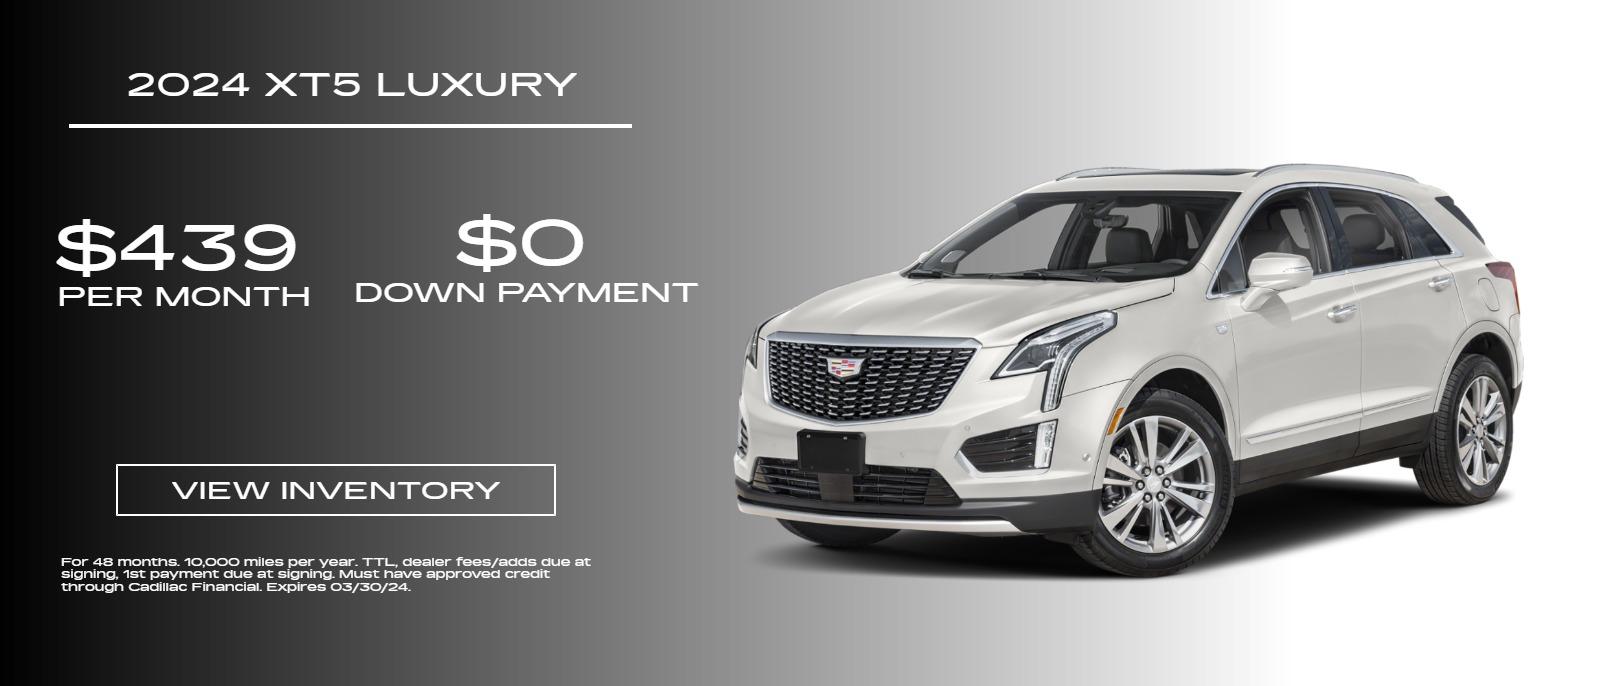 Luxury XT5 - $439/mo, 48 months, 10,000 miles per year. $0 down